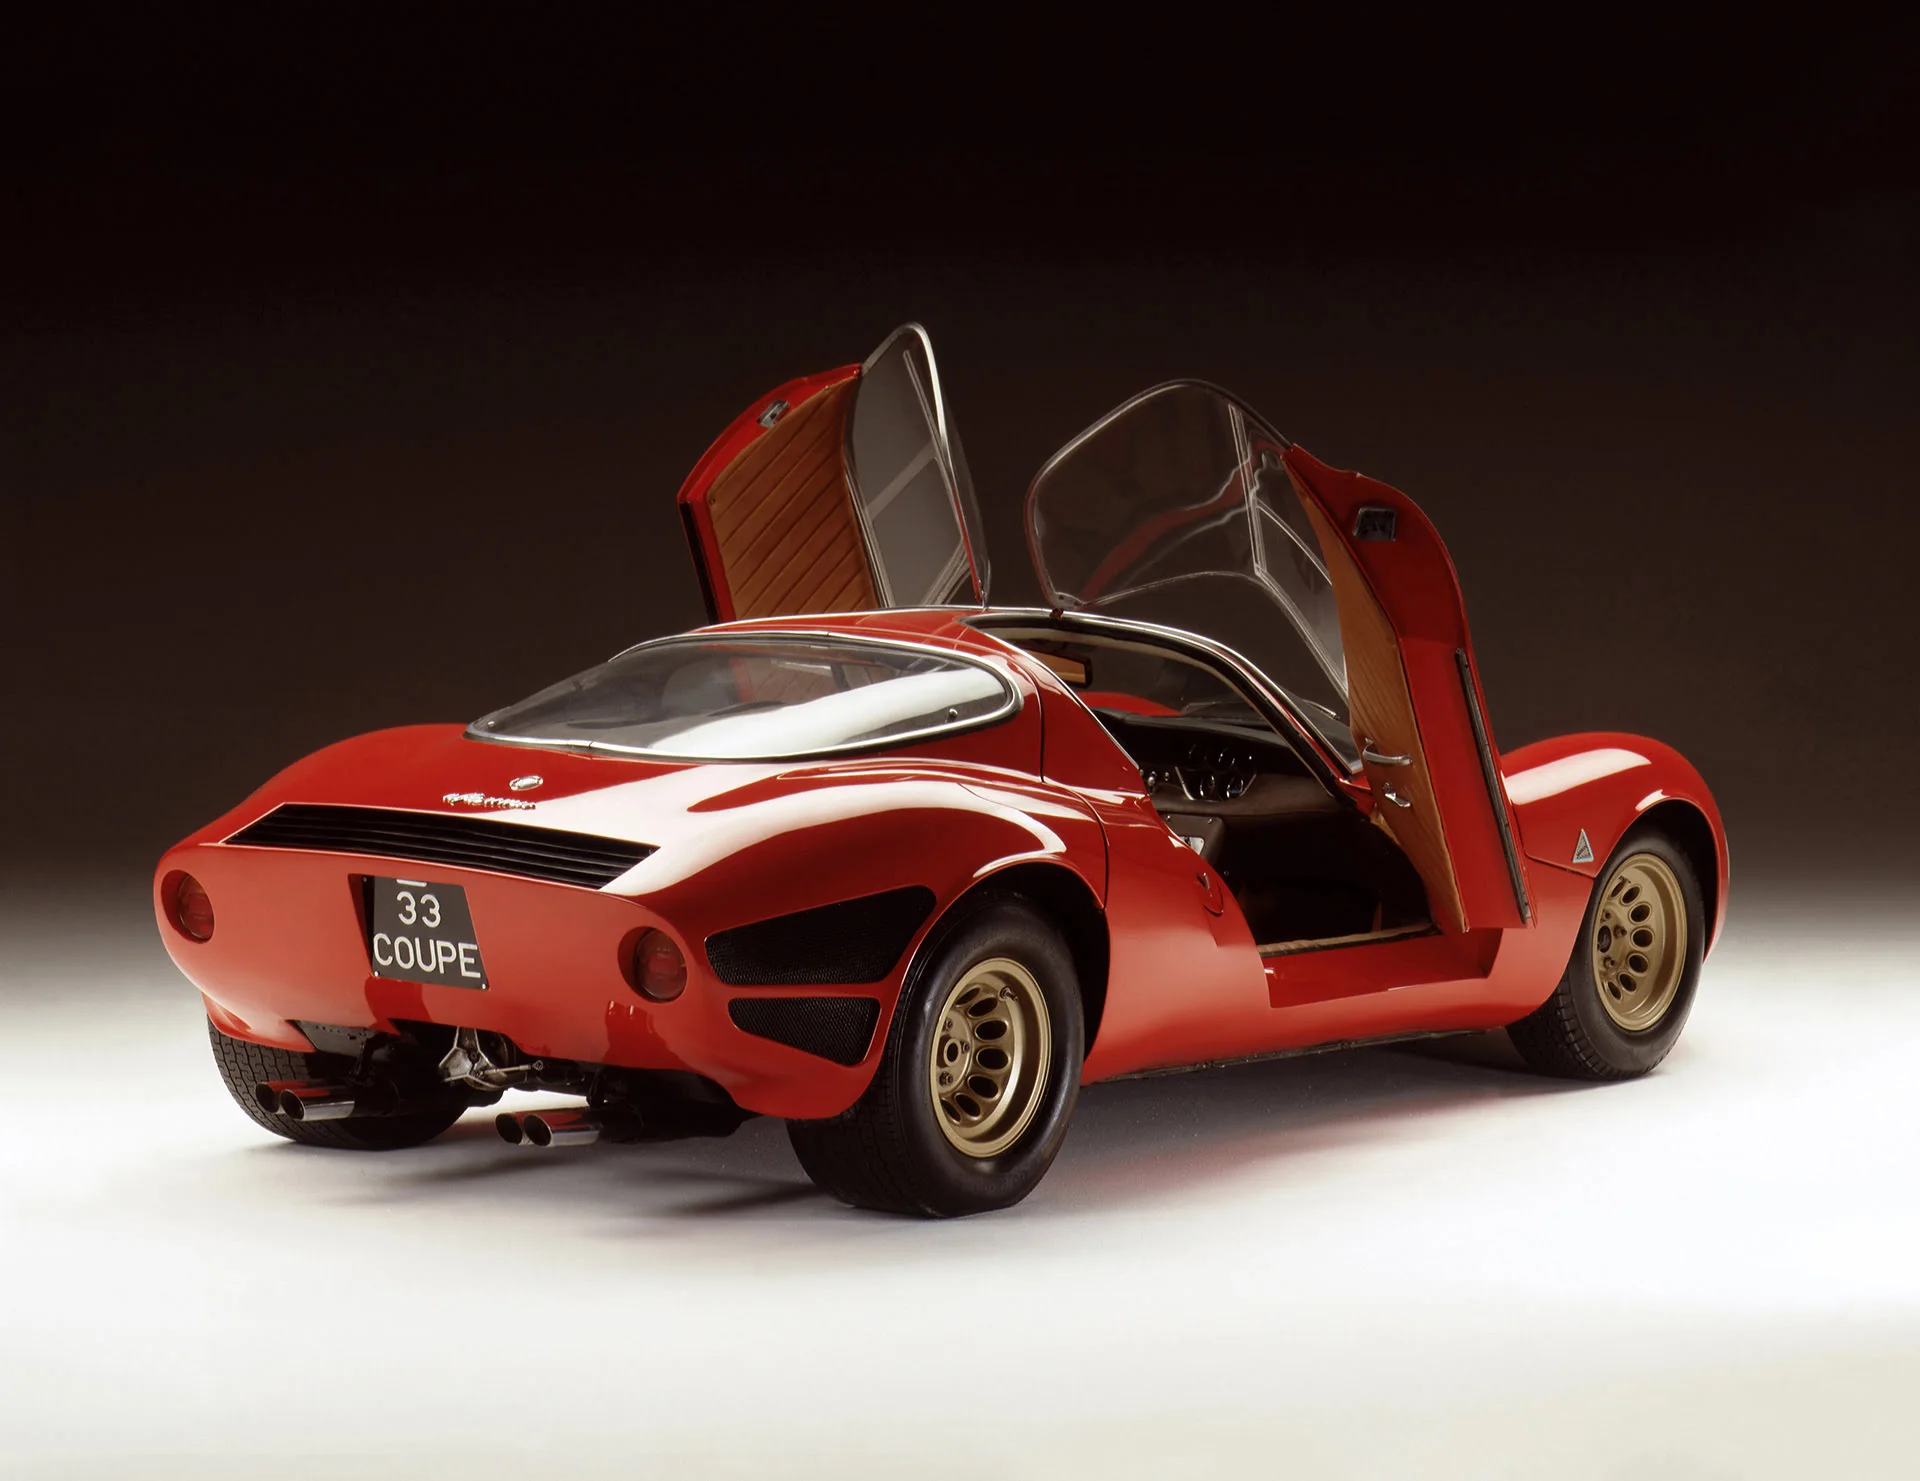 Good grief! The limited-run Alfa Romeo 33 Stradale is utterly gorgeous